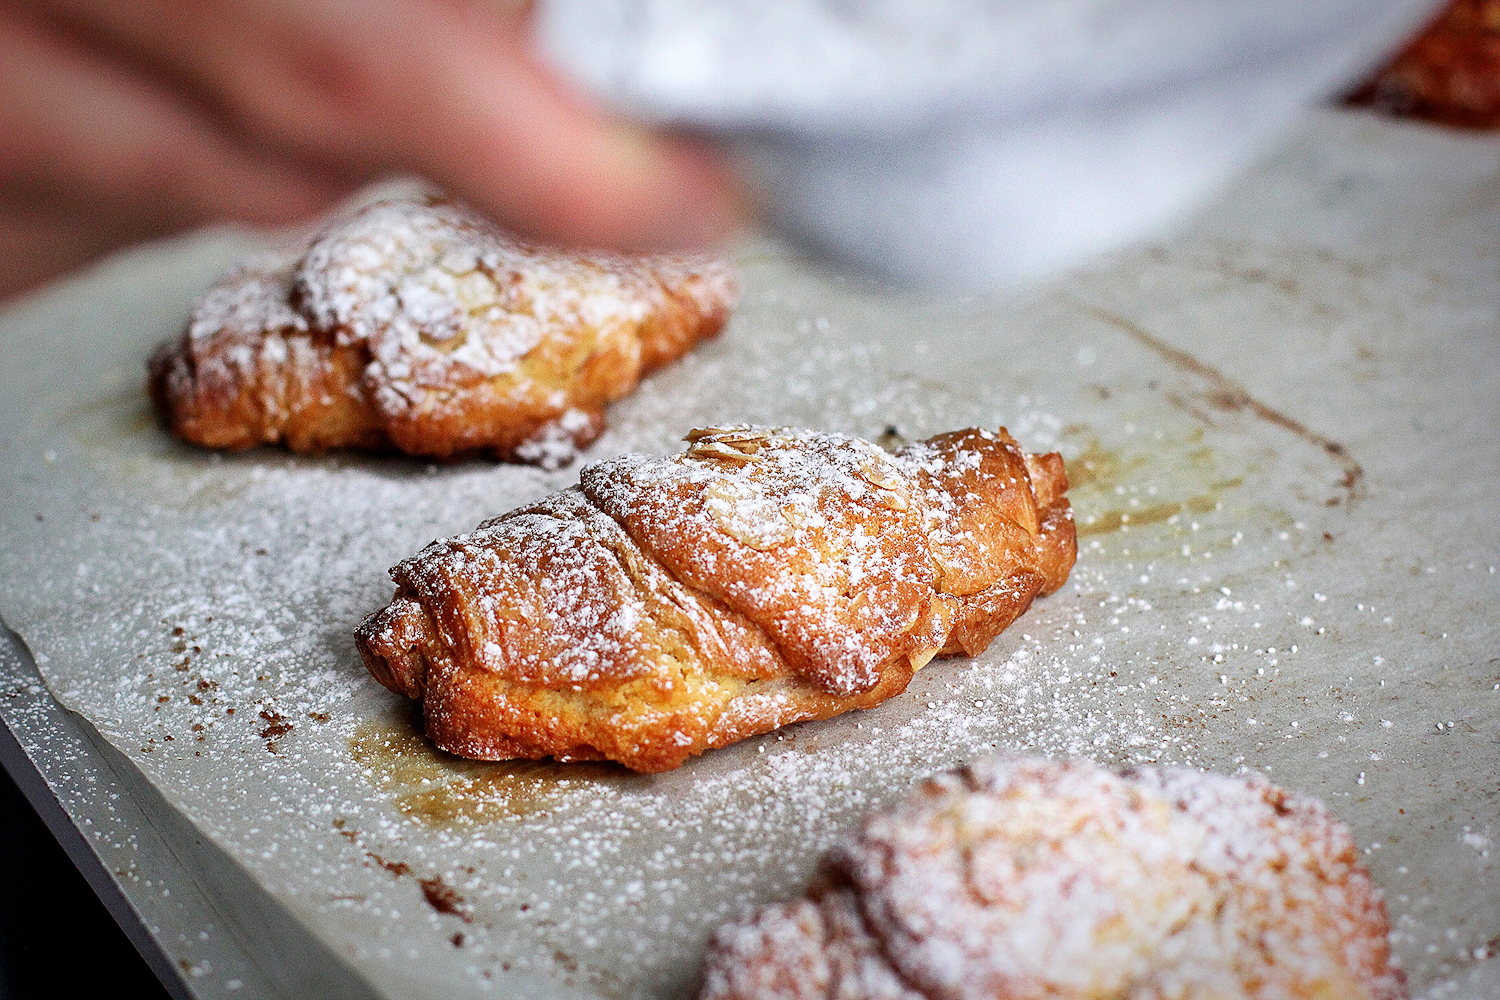 Almond croissants getting dusted with icing sugar